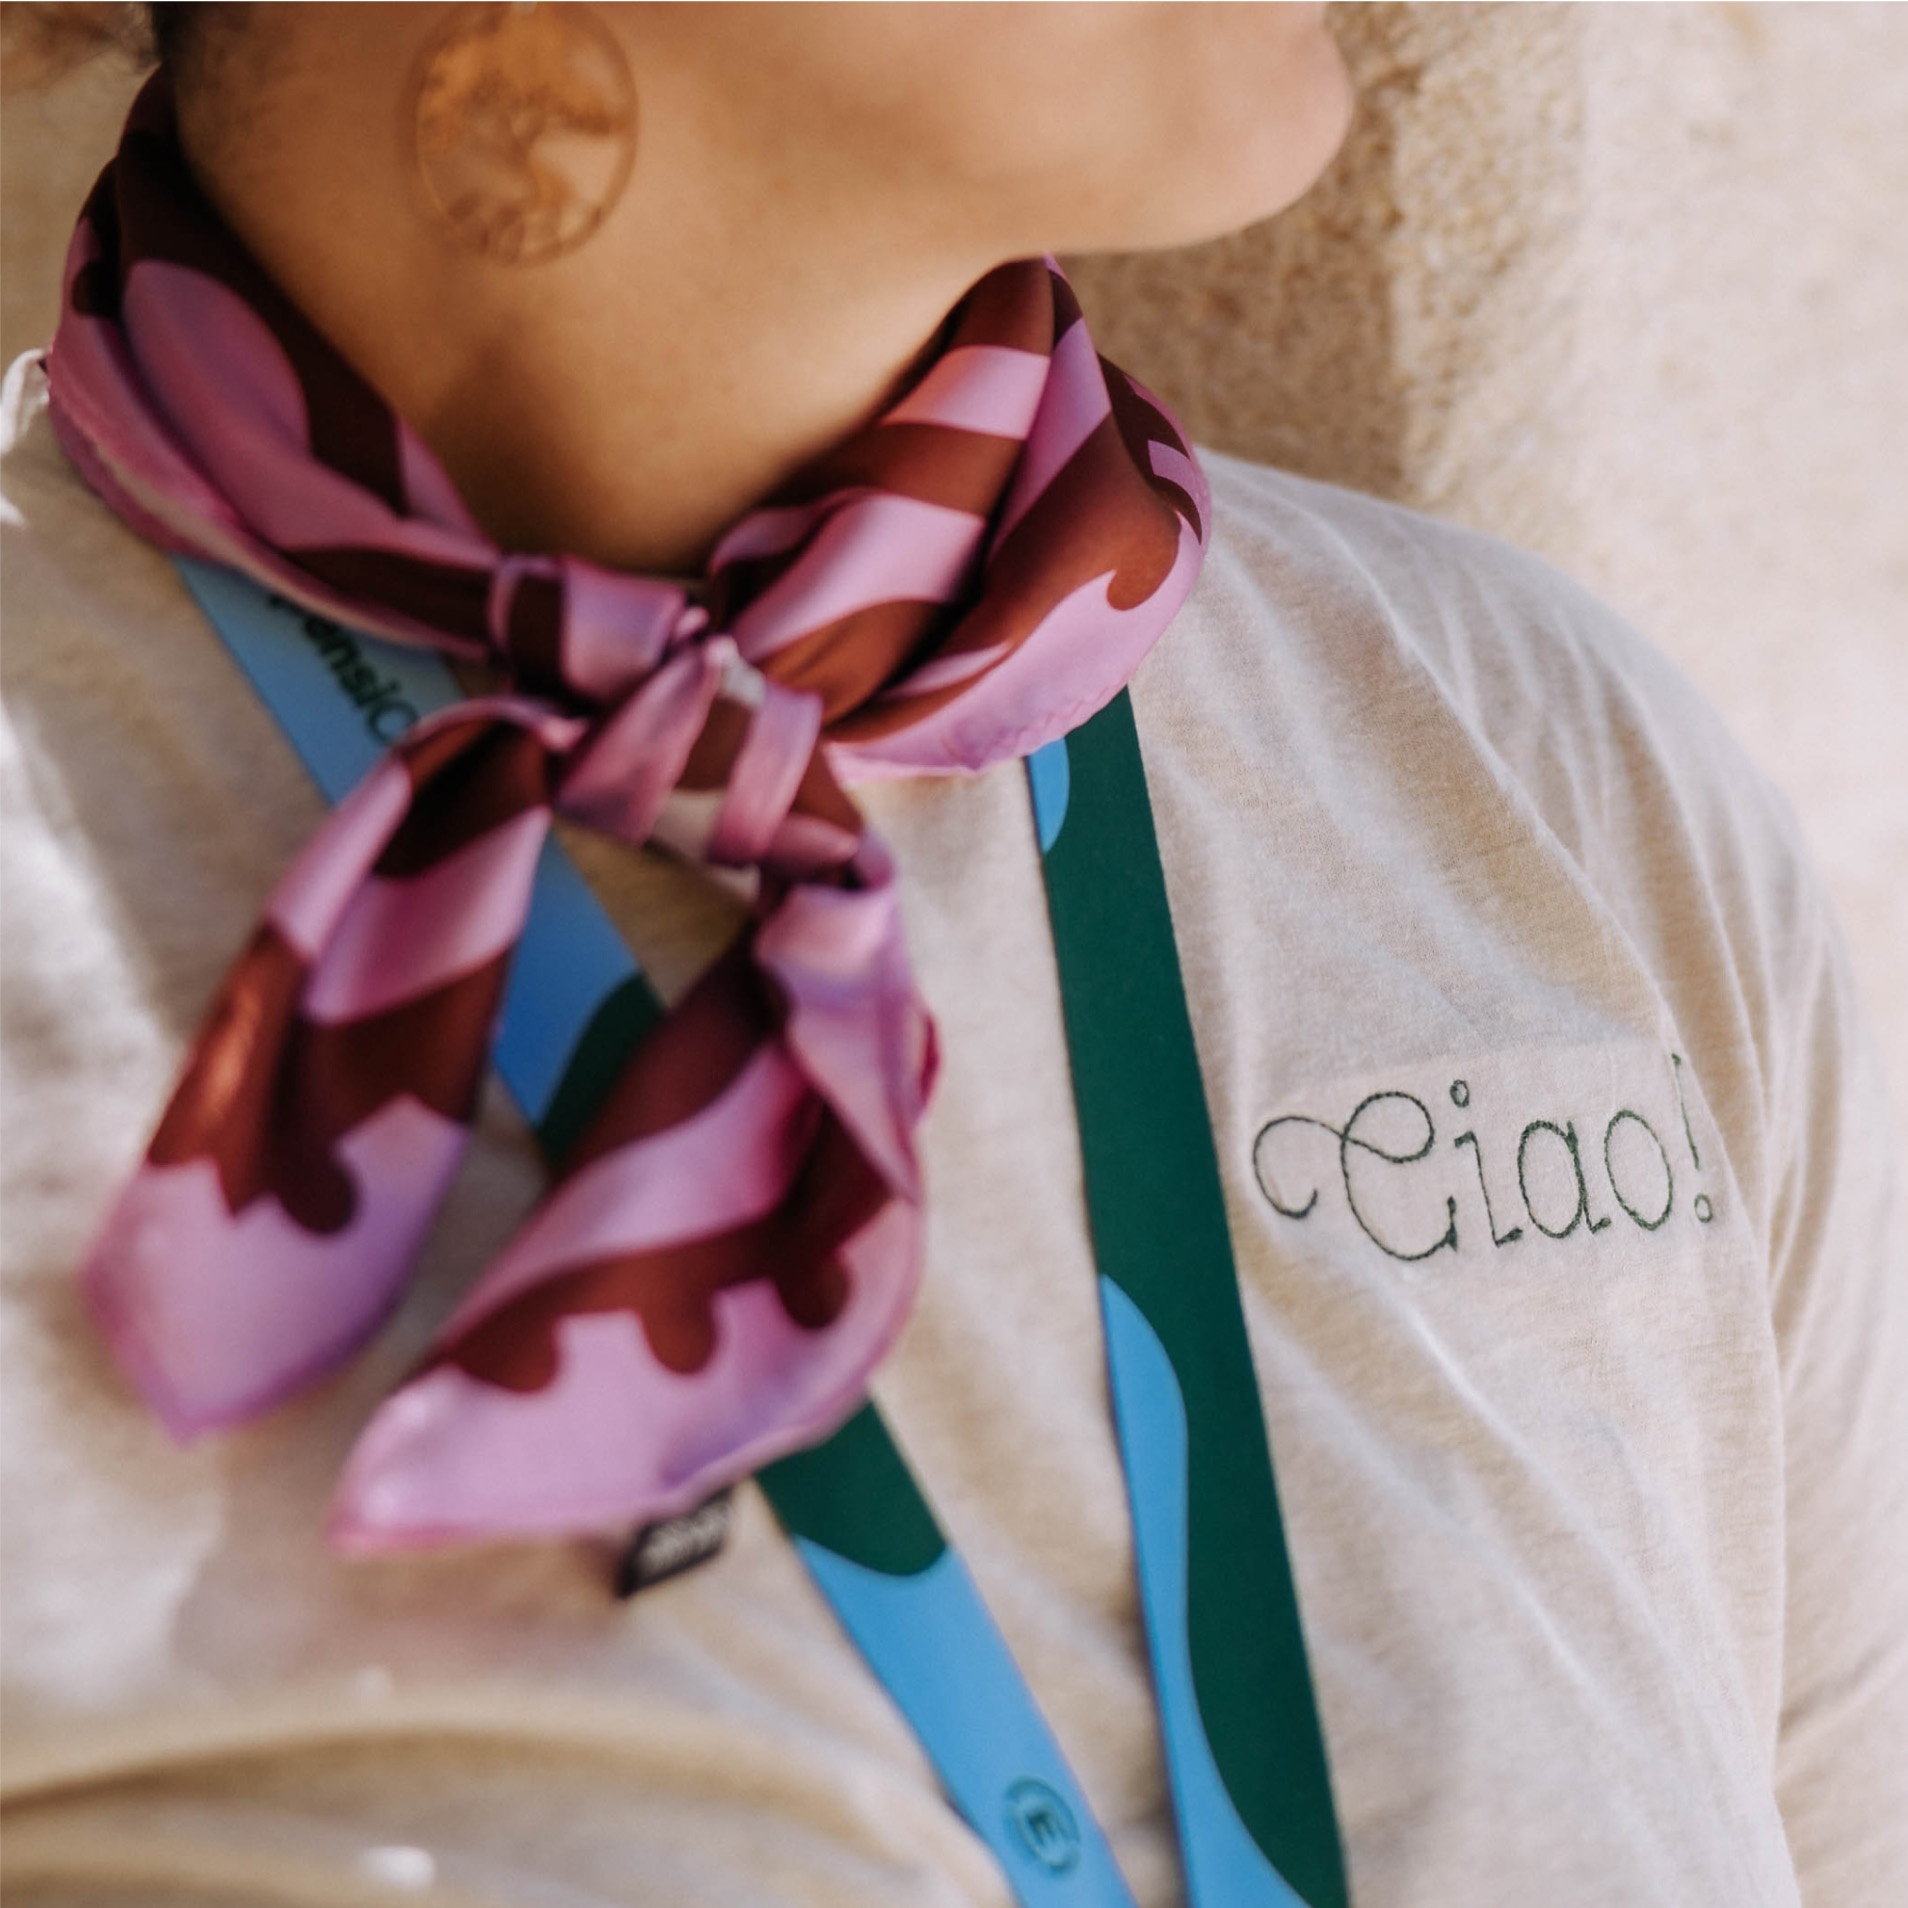 Detail of a silk scarf and t-shirt with the word Ciao on it